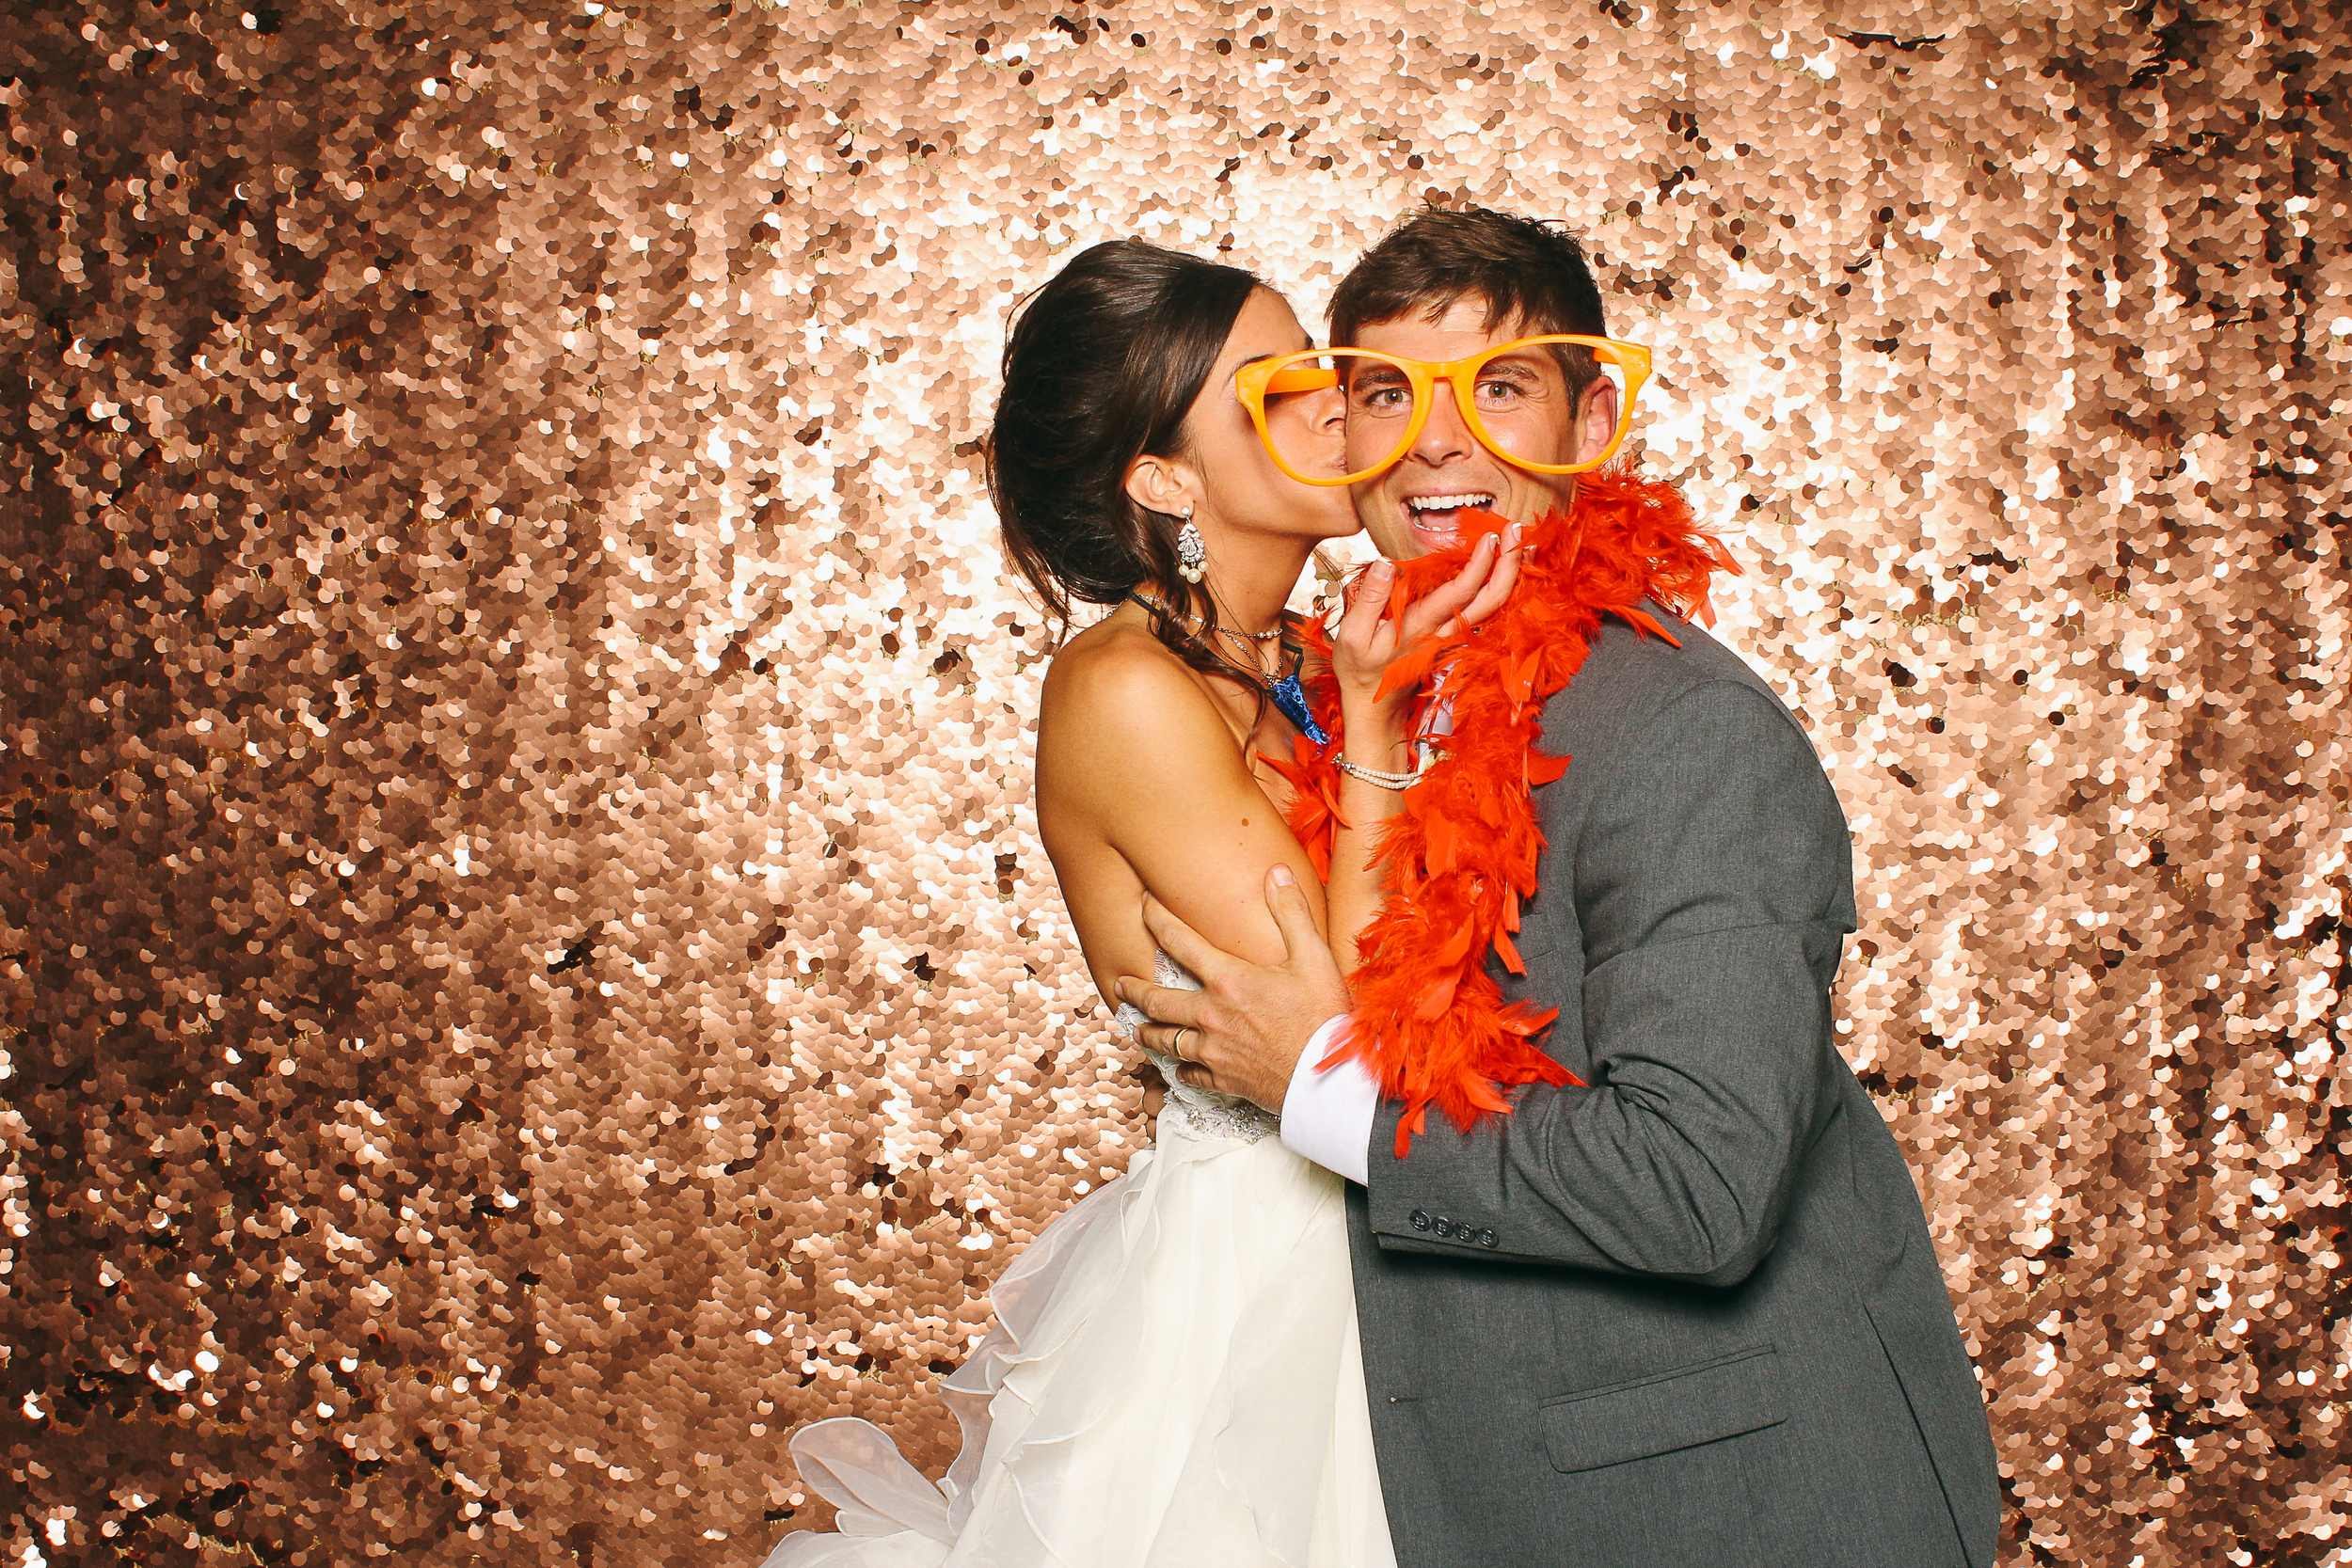 00003-Youngstown Wedding Photobooth Rental Kelly and Nick-20140913.jpg